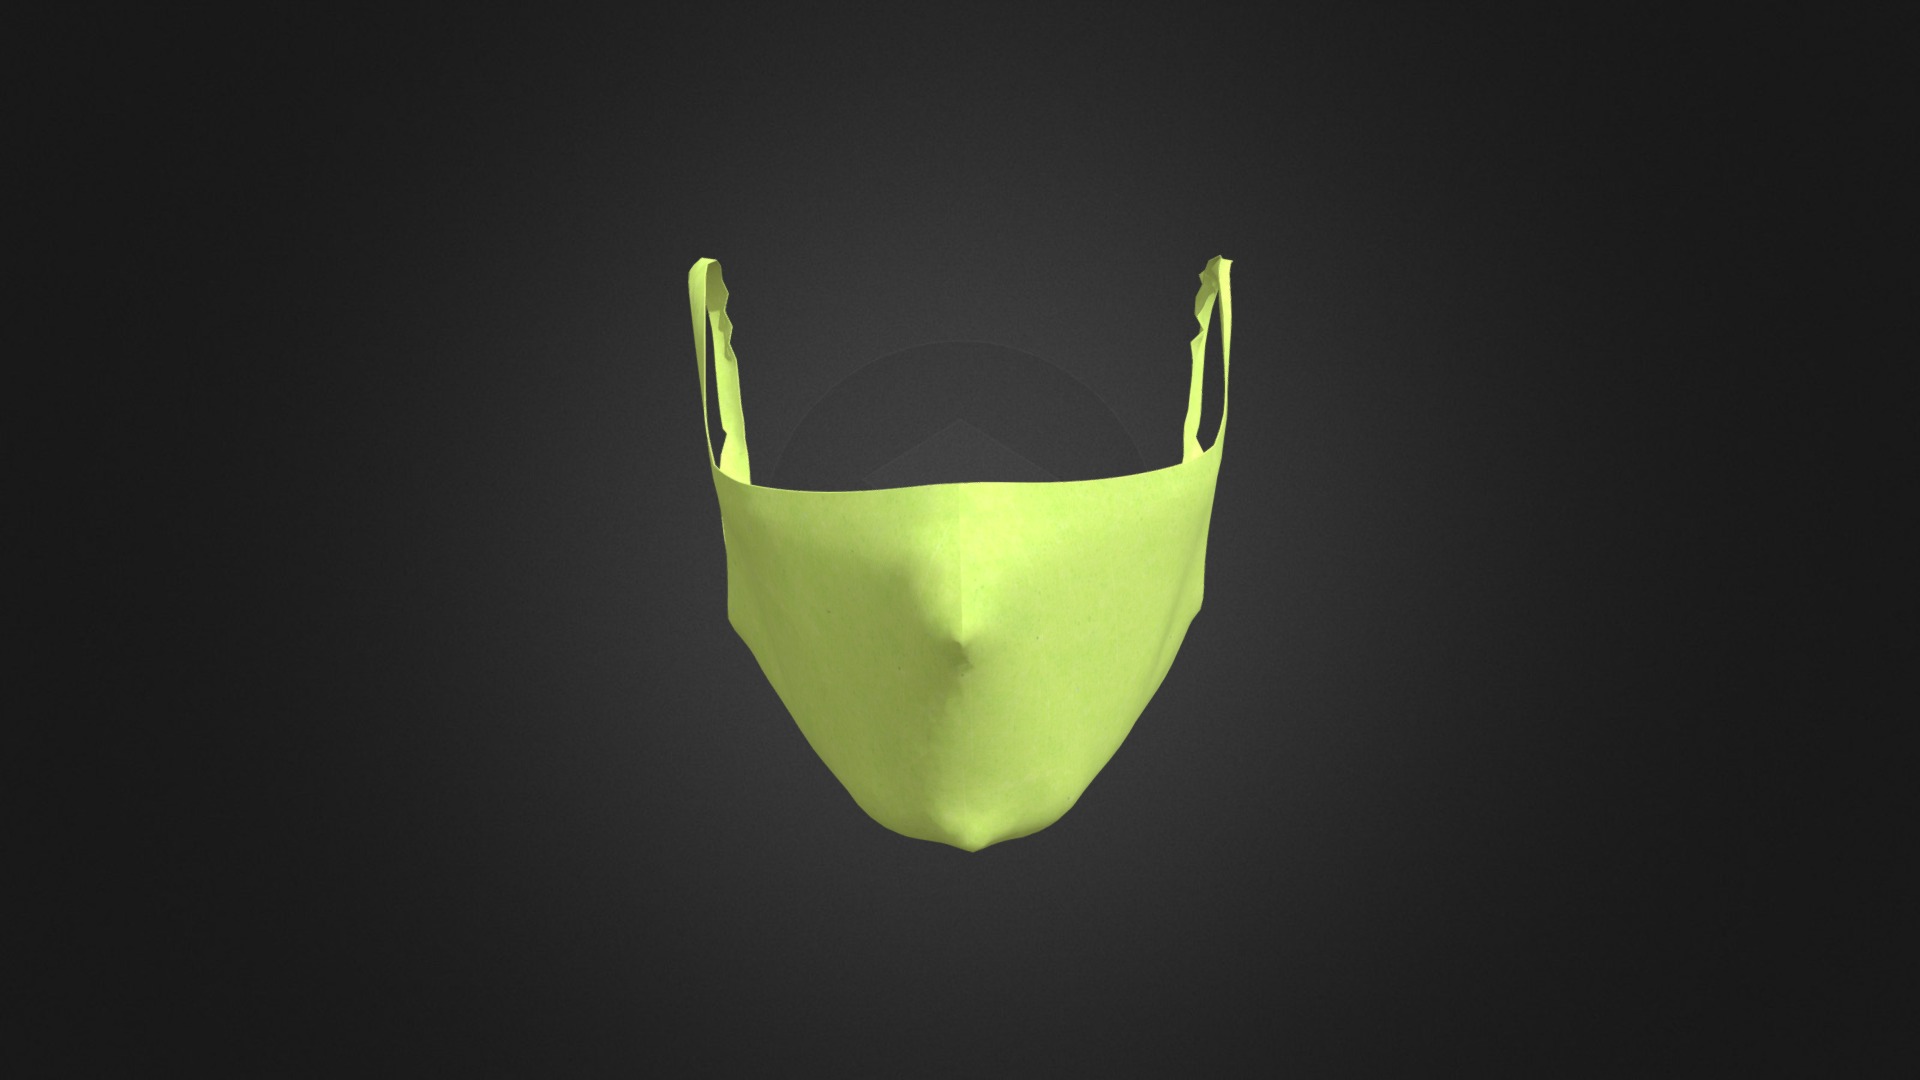 3D model Flame retardant mask - This is a 3D model of the Flame retardant mask. The 3D model is about a green apple with a black background.